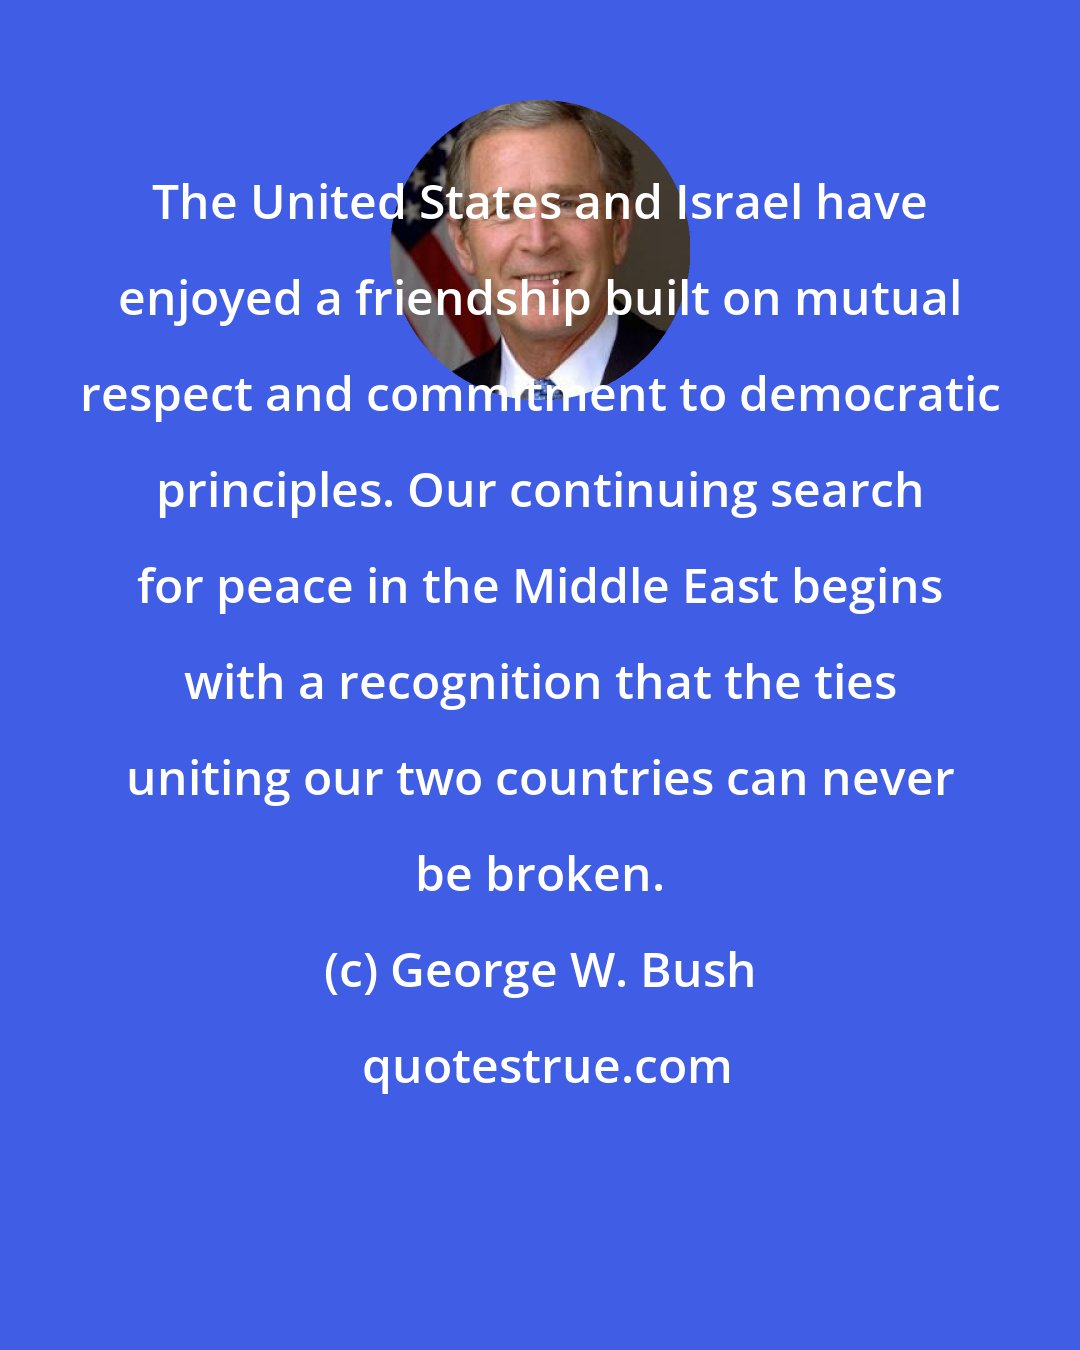 George W. Bush: The United States and Israel have enjoyed a friendship built on mutual respect and commitment to democratic principles. Our continuing search for peace in the Middle East begins with a recognition that the ties uniting our two countries can never be broken.